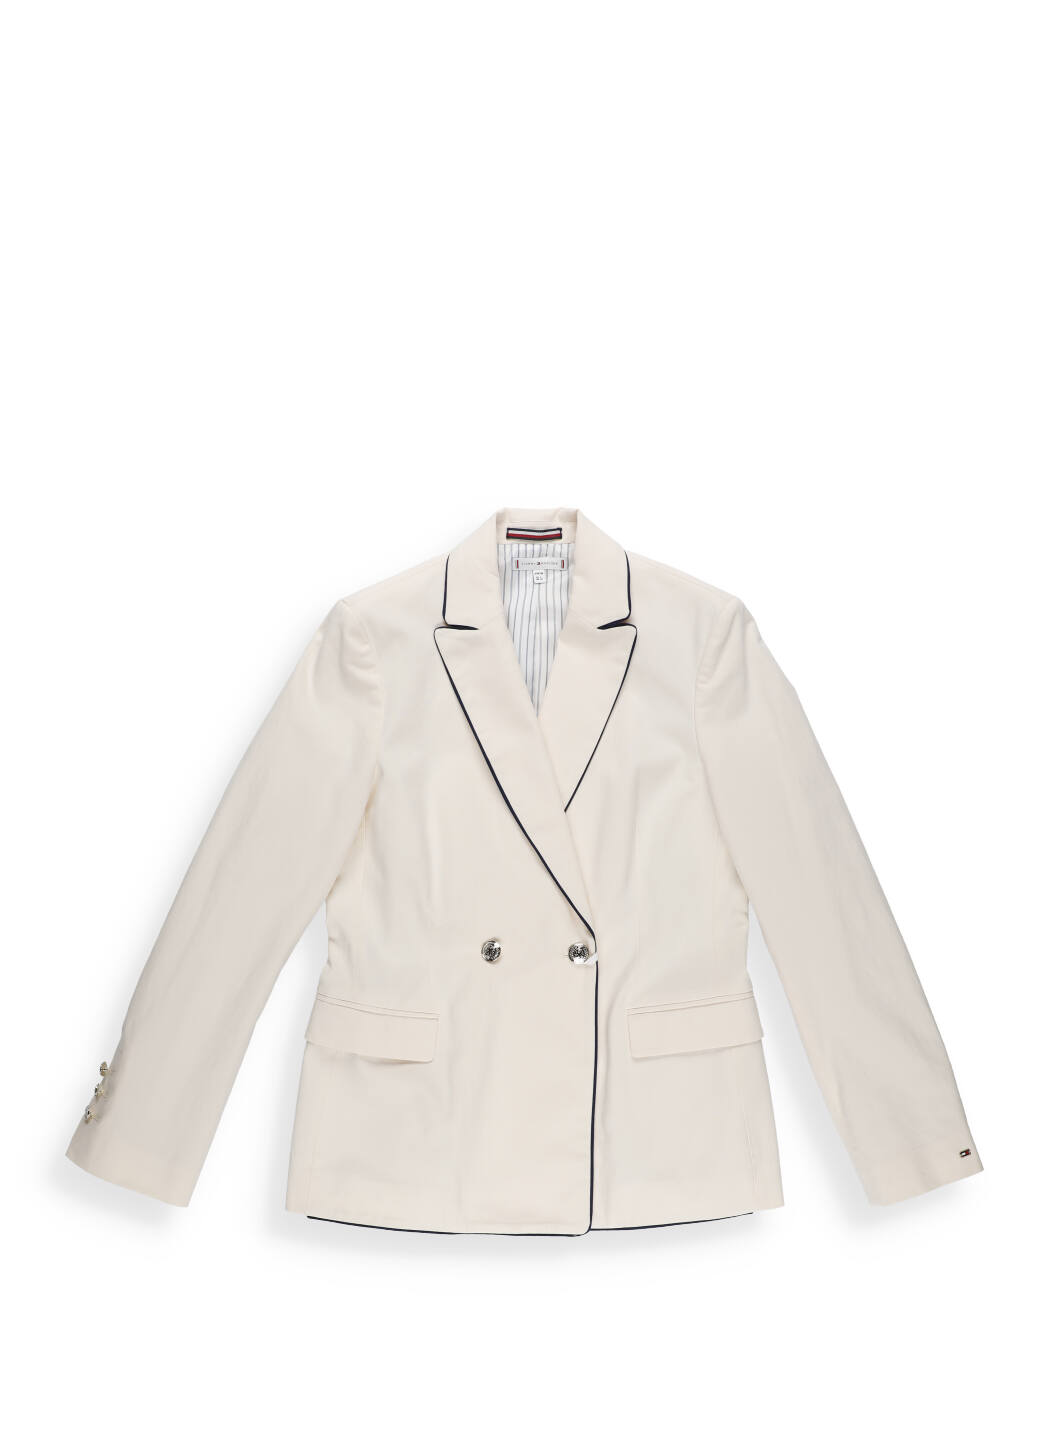 Tommy Hilfiger Double Breasted Blazer With Contrast Trims